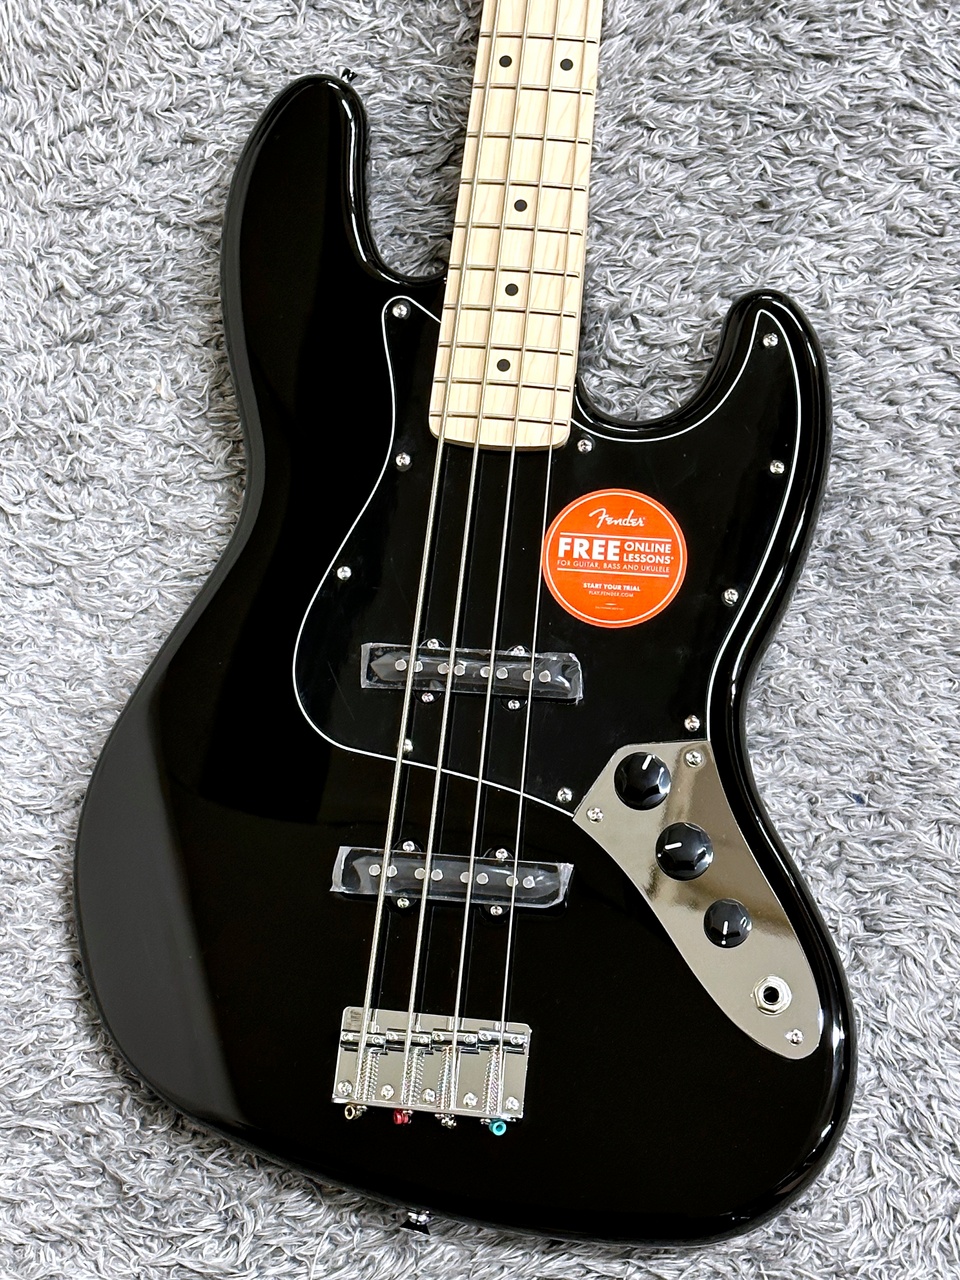 Squire Fender Affinity Jazz bass